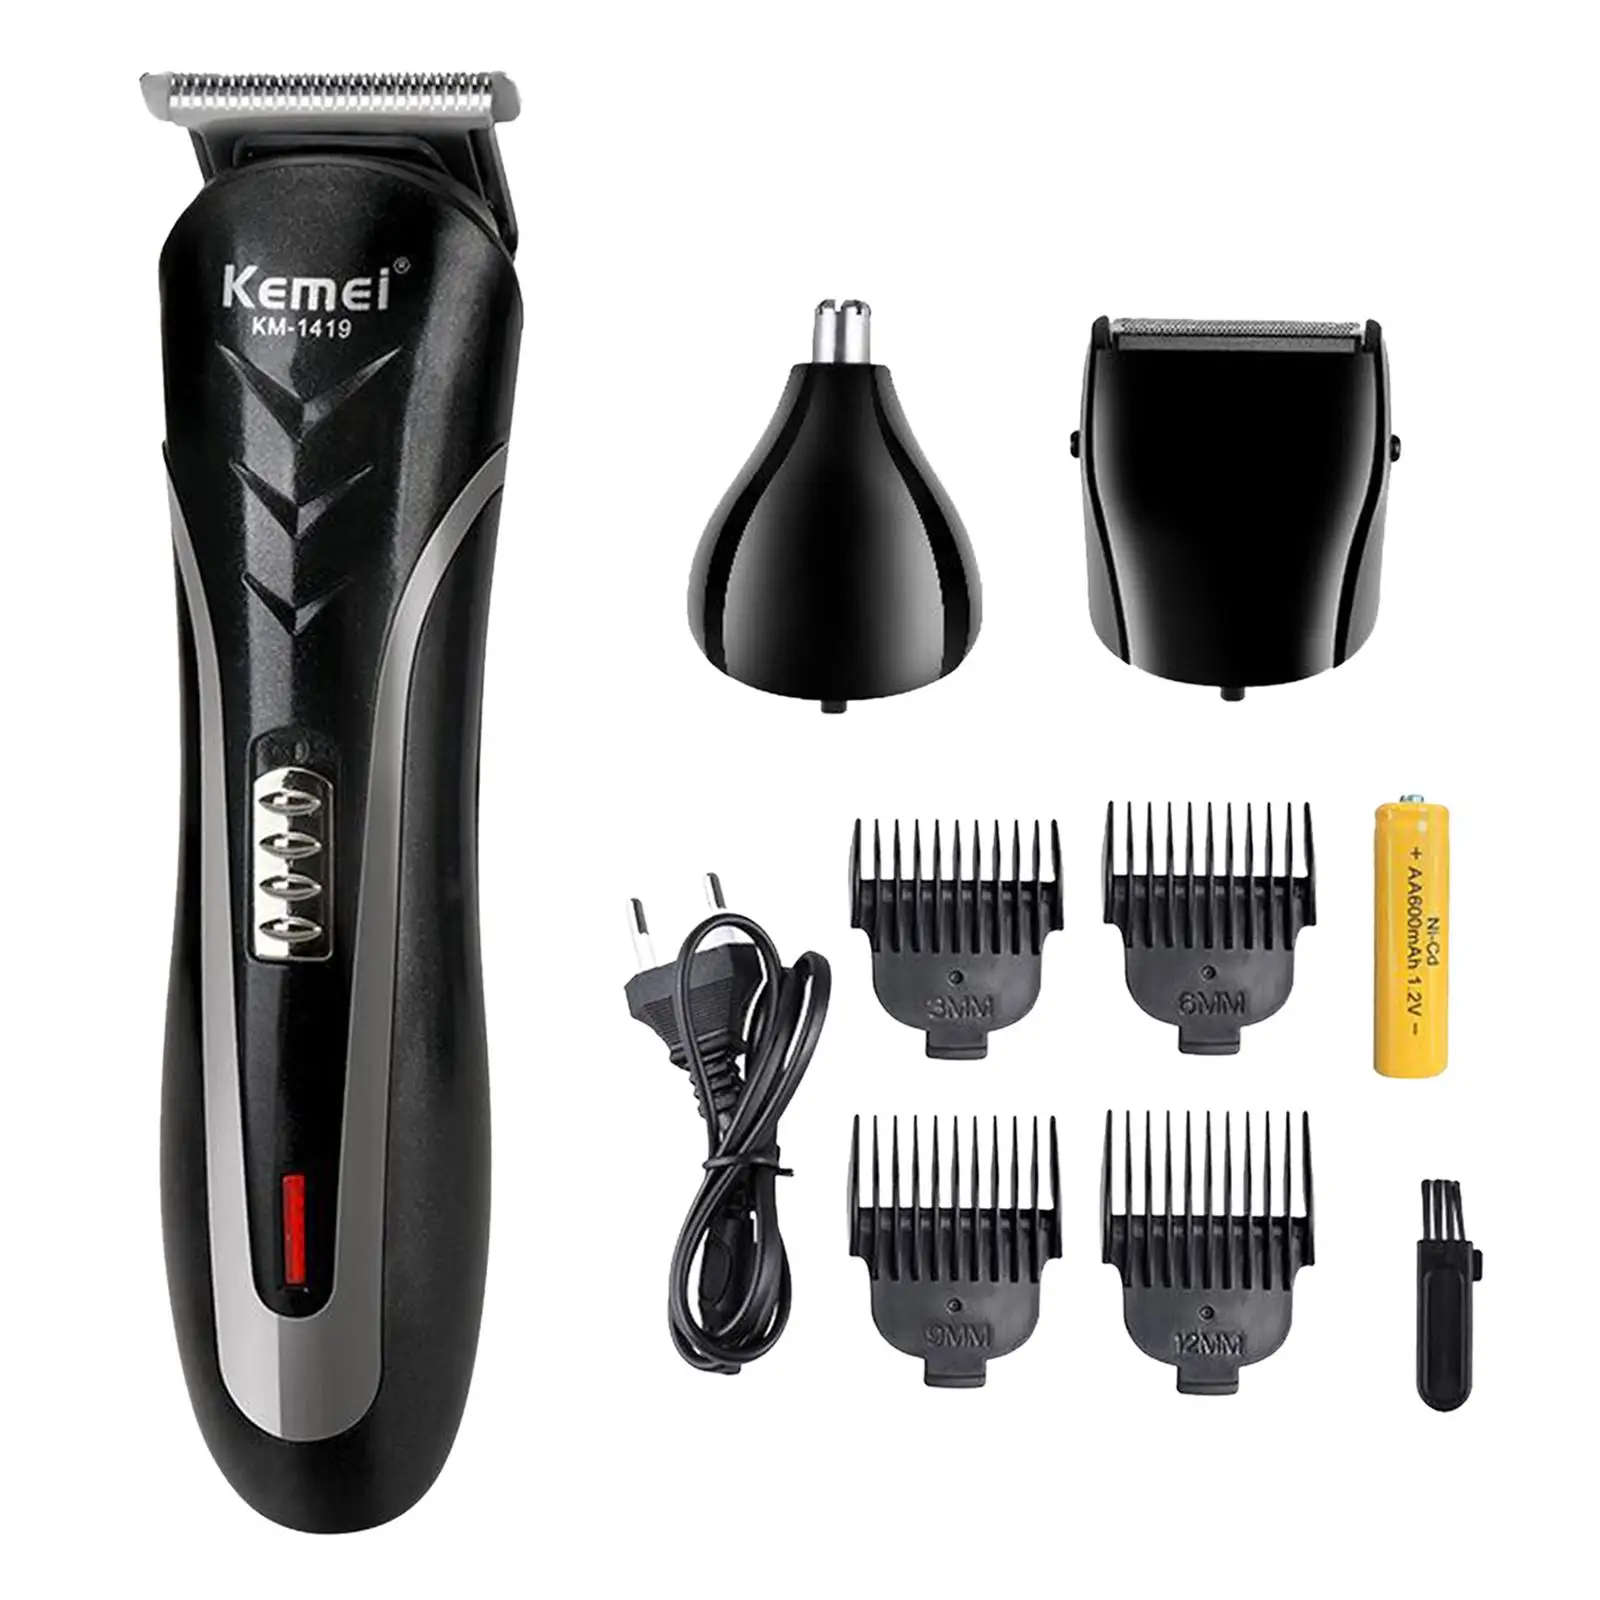 Professional Hair s for Men Hair Cutting with 4 Guide Combs Scissor Hair Beard Trimmer Hears Tools Hairdressing Salon